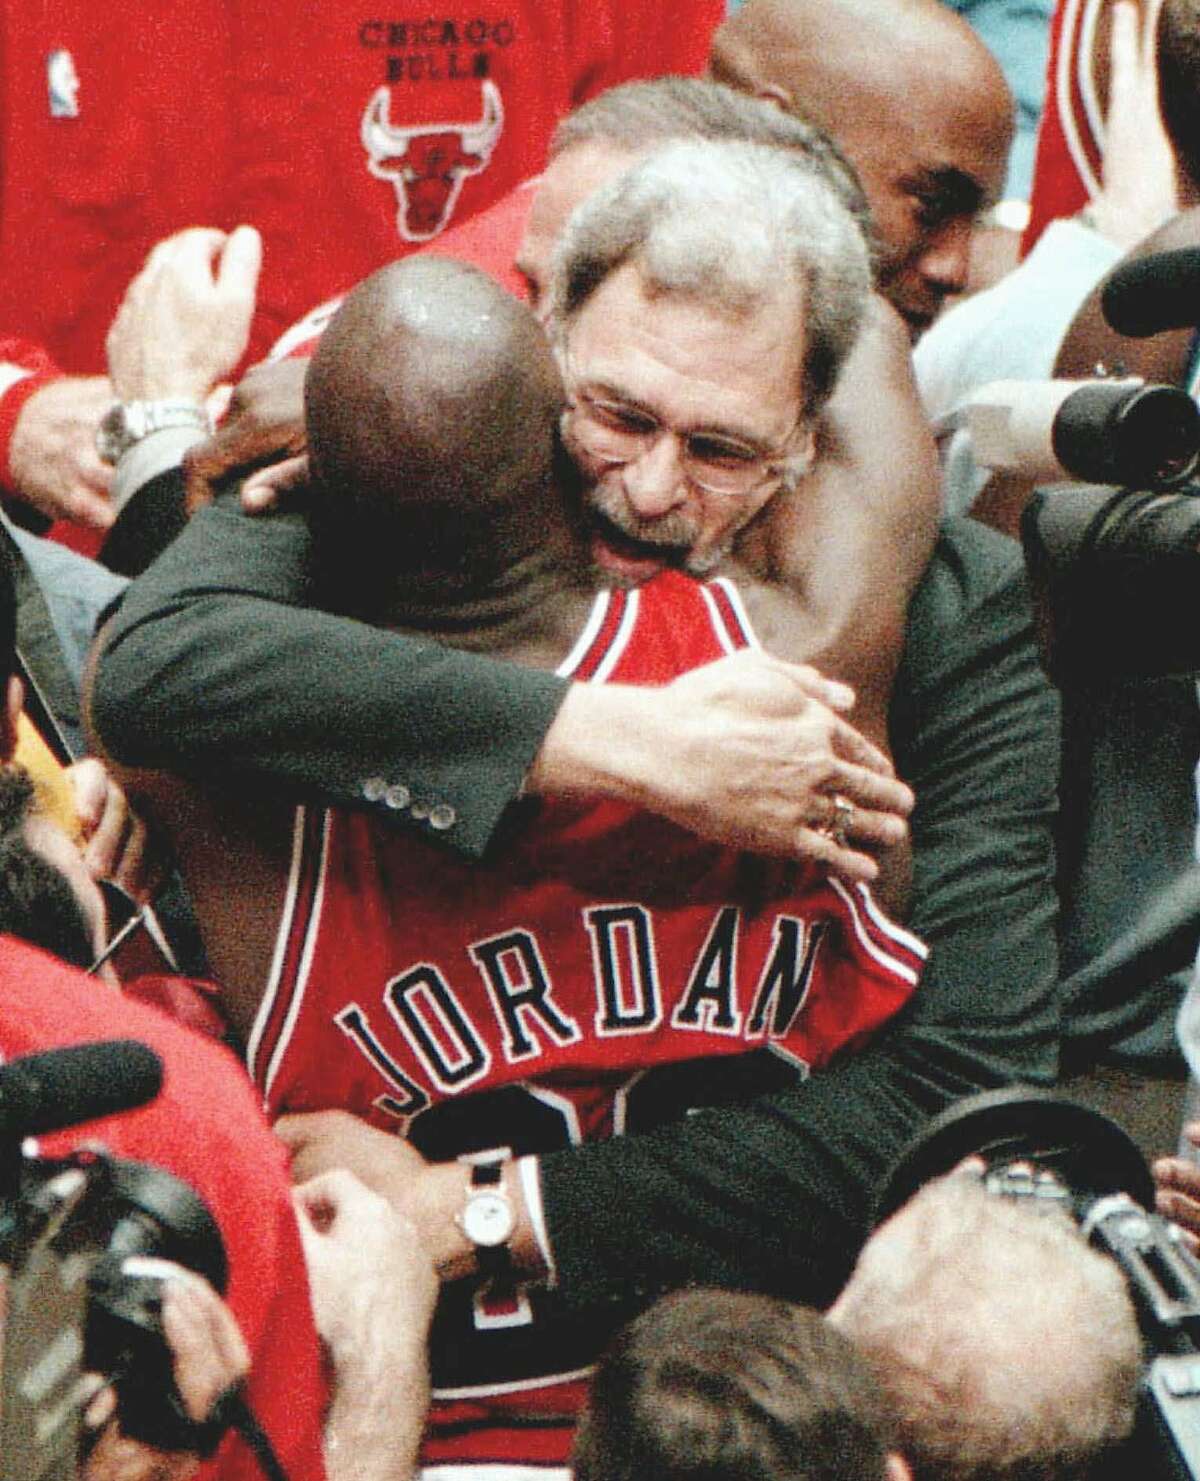 Chicago Bulls coach Phil Jackson and Michael Jordan embrace after the Bulls won their 6th NBA championship with an 87-86 win over the Utah Jazz in Game 6 on Sunday, June 14, 1998, at the Delta Center in Salt Lake City. (AP Photo/Chicago Tribune, Nuccio DiNuzzio) HOUCHRON CAPTION (06/16/1998): Michael Jordan would love to see Phil Jackson return, but don't count on it.